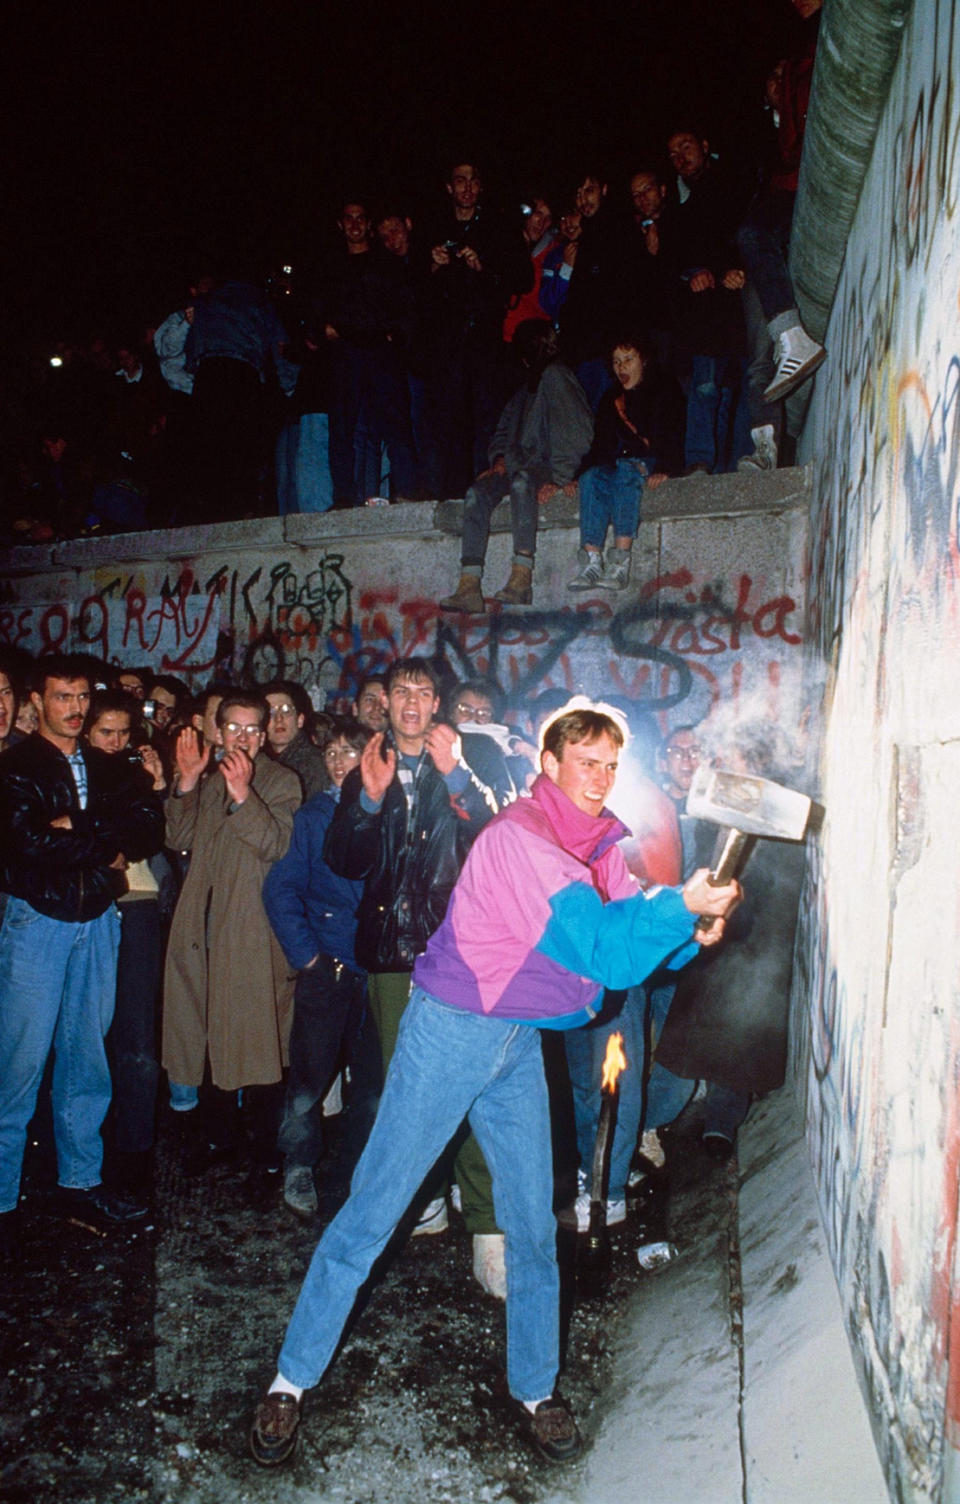 12/11/1989- Joyous Berliners break cheer as a young man hammers at the wall. Picture- Corbis Images